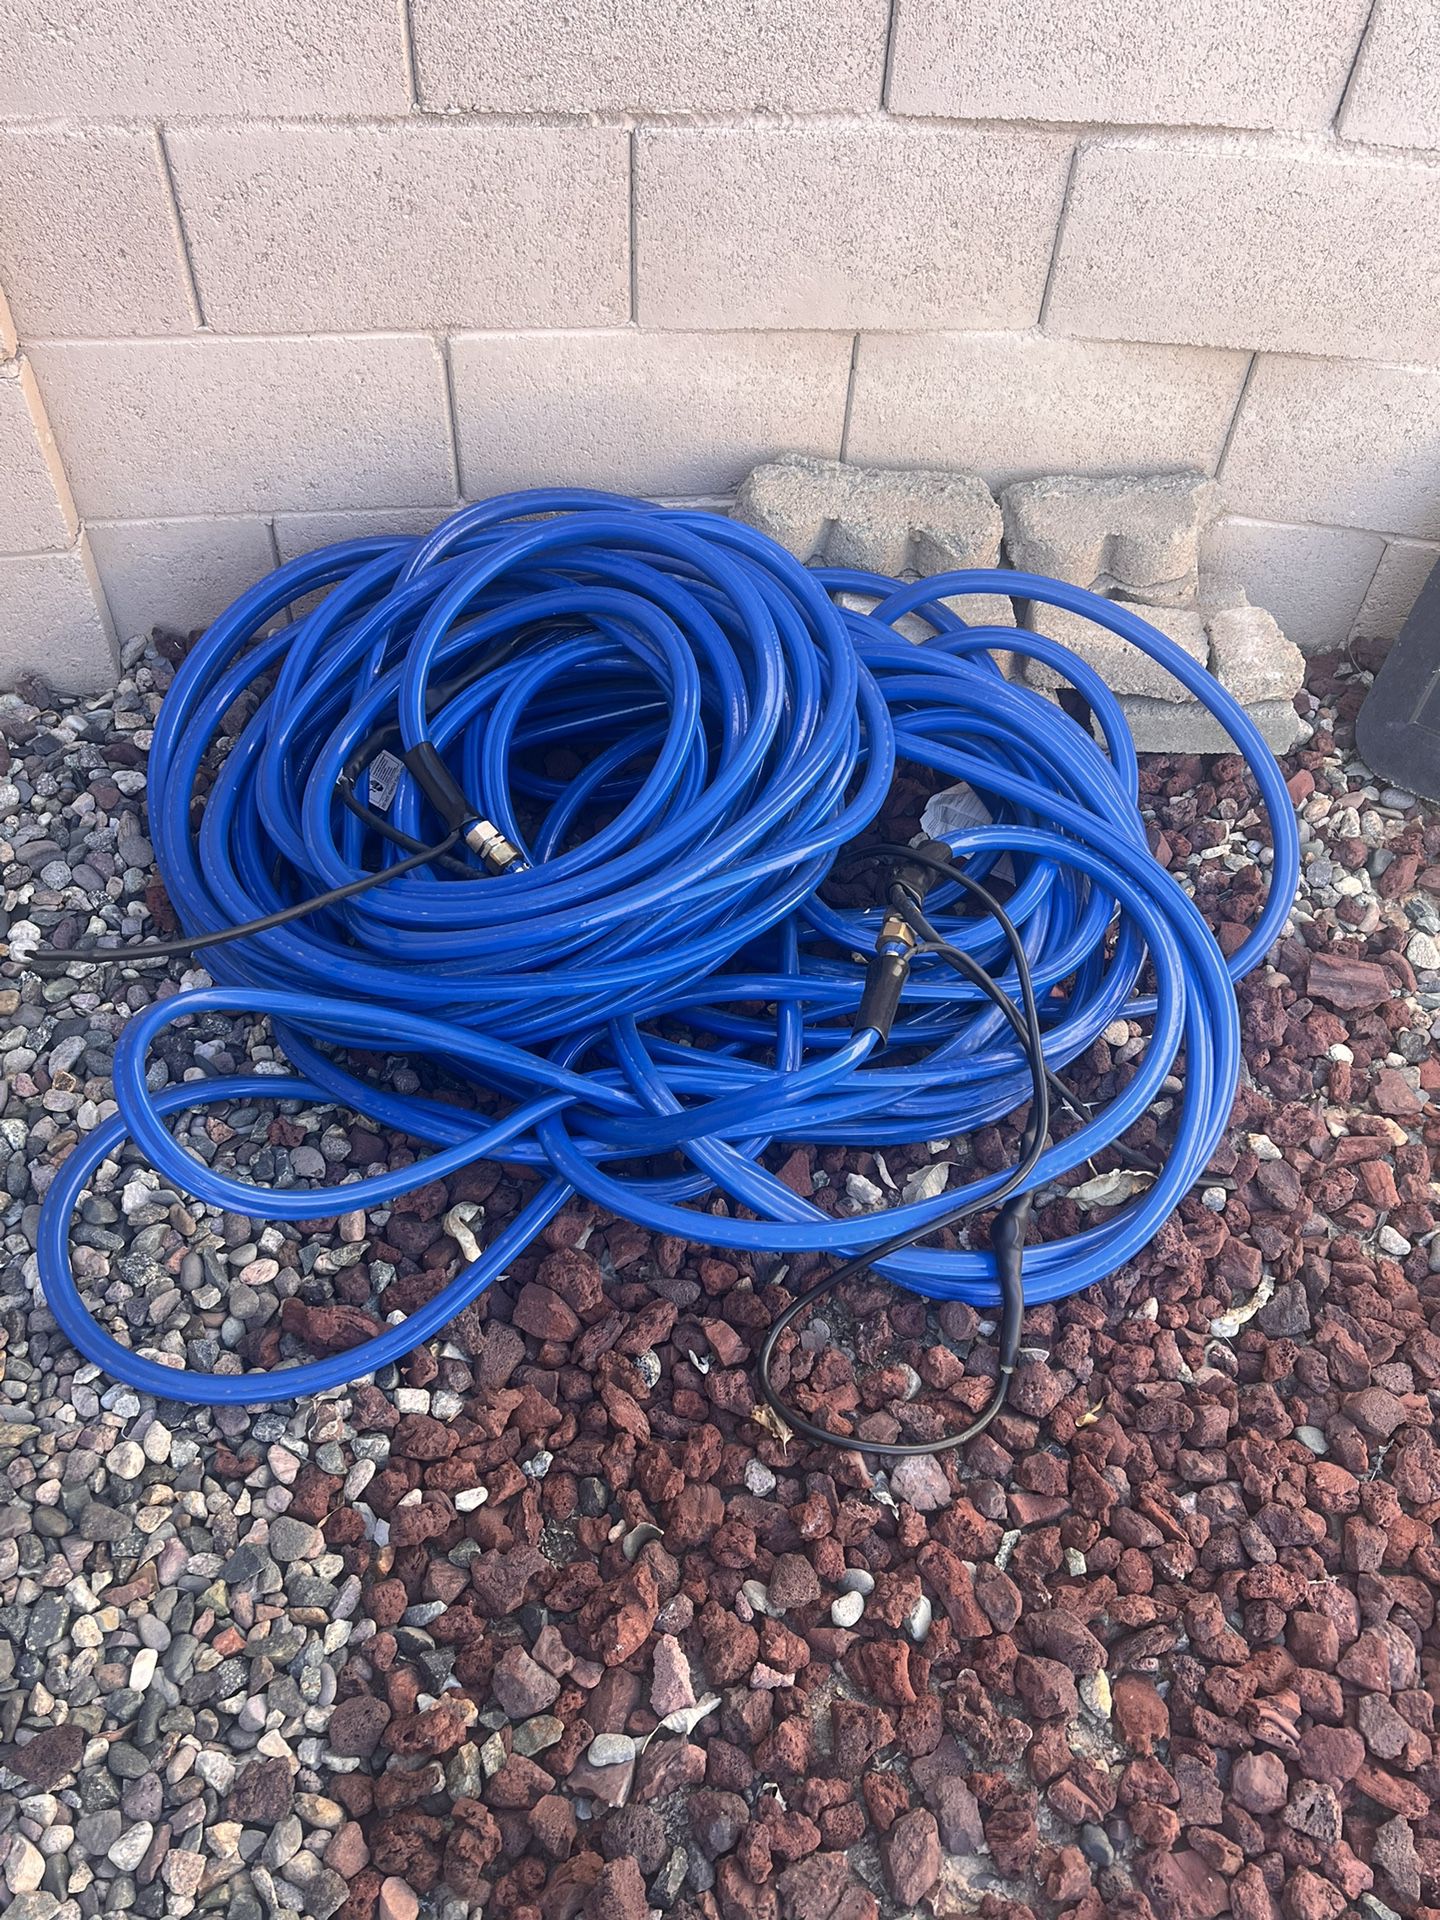 Two 100’ Heated Hose $300 Or $150 Each 